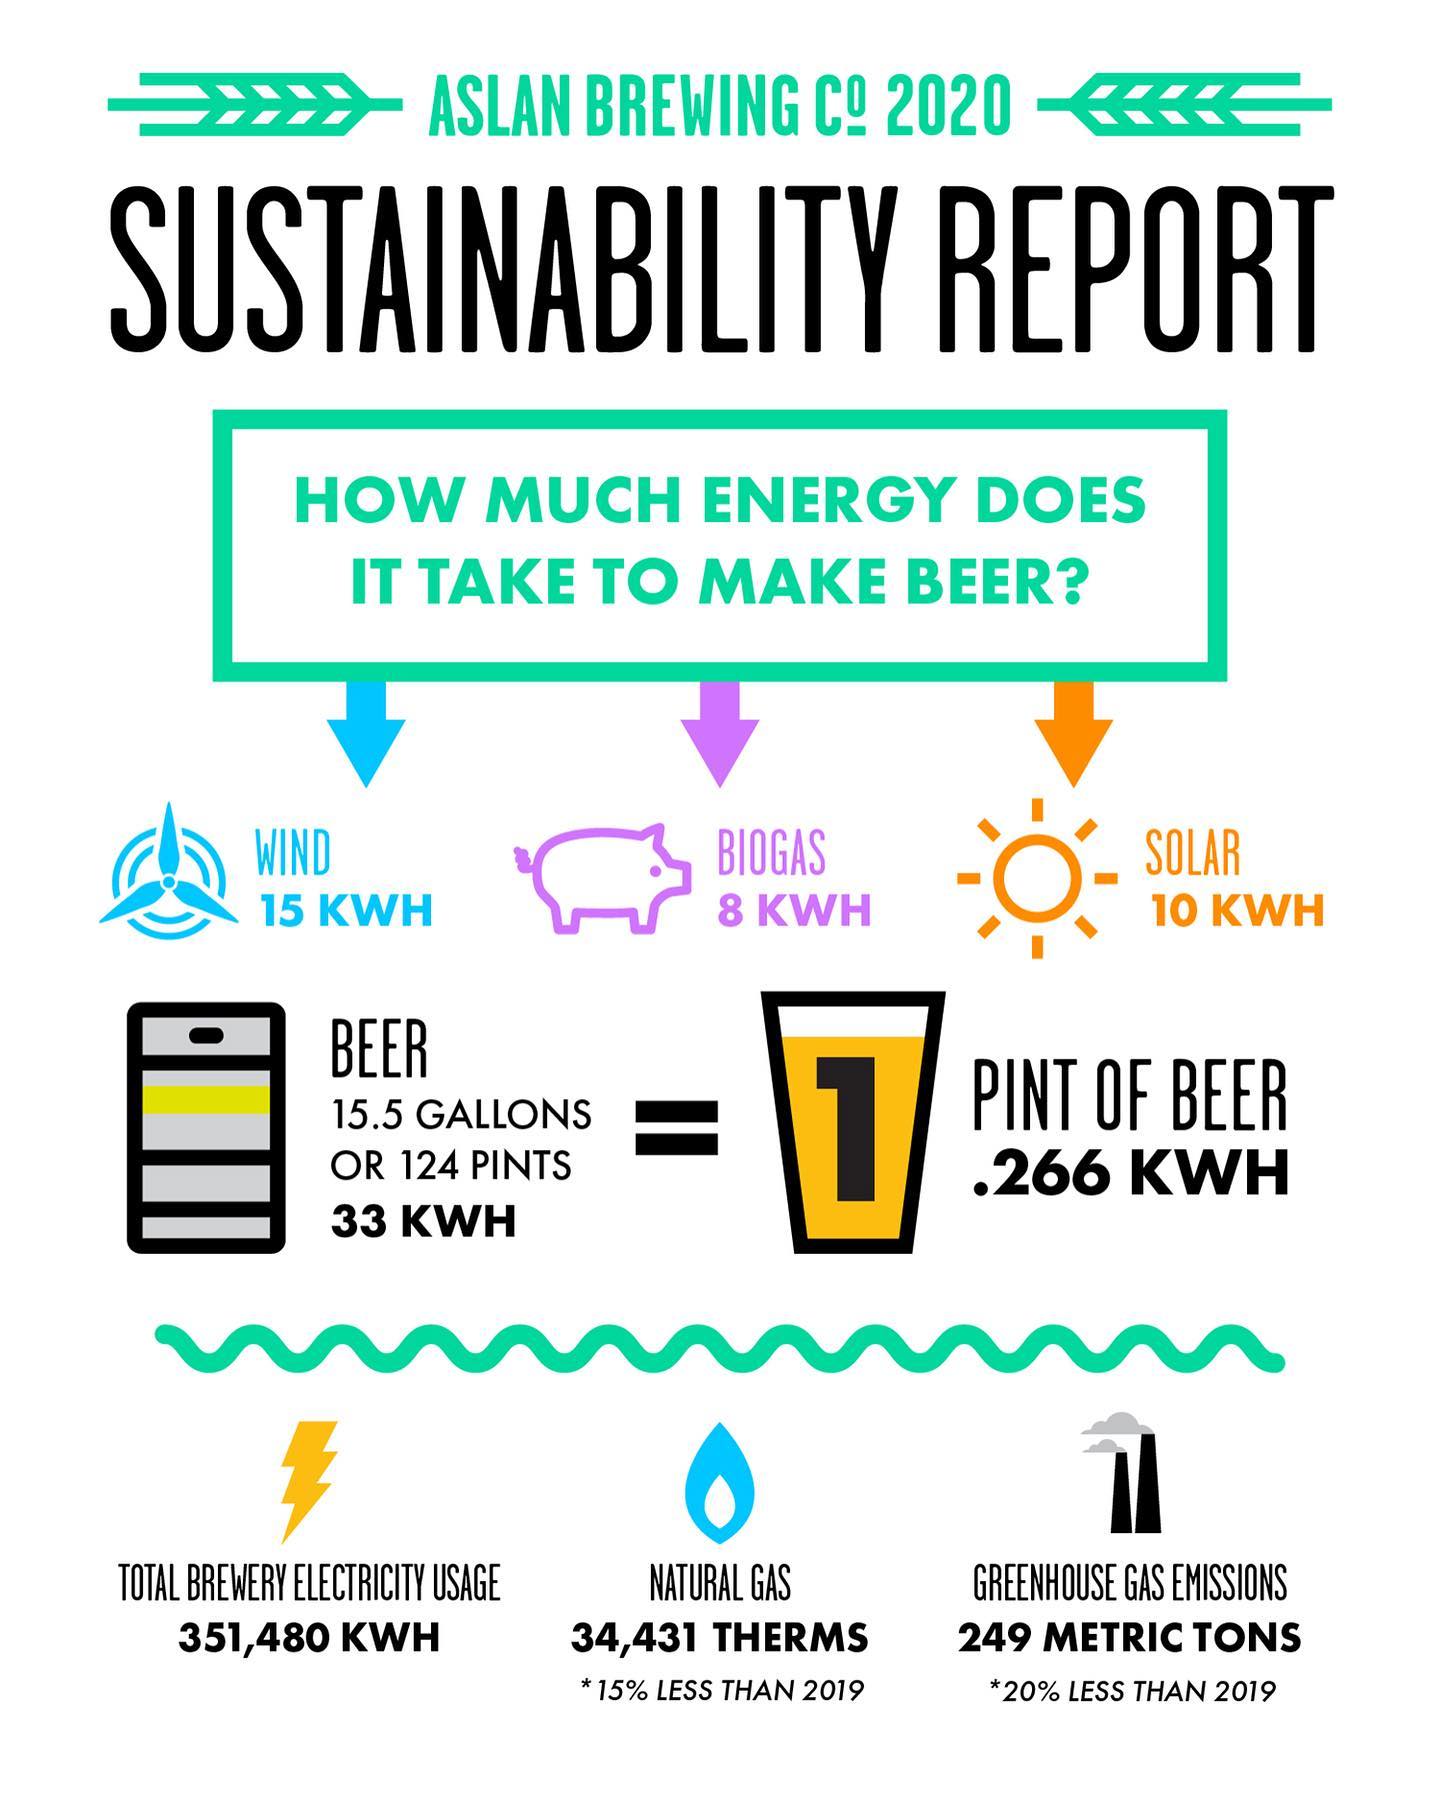 Aslan Brewing 2020 Sustainability Report - How Much Energy Does It Take To Make Beer?